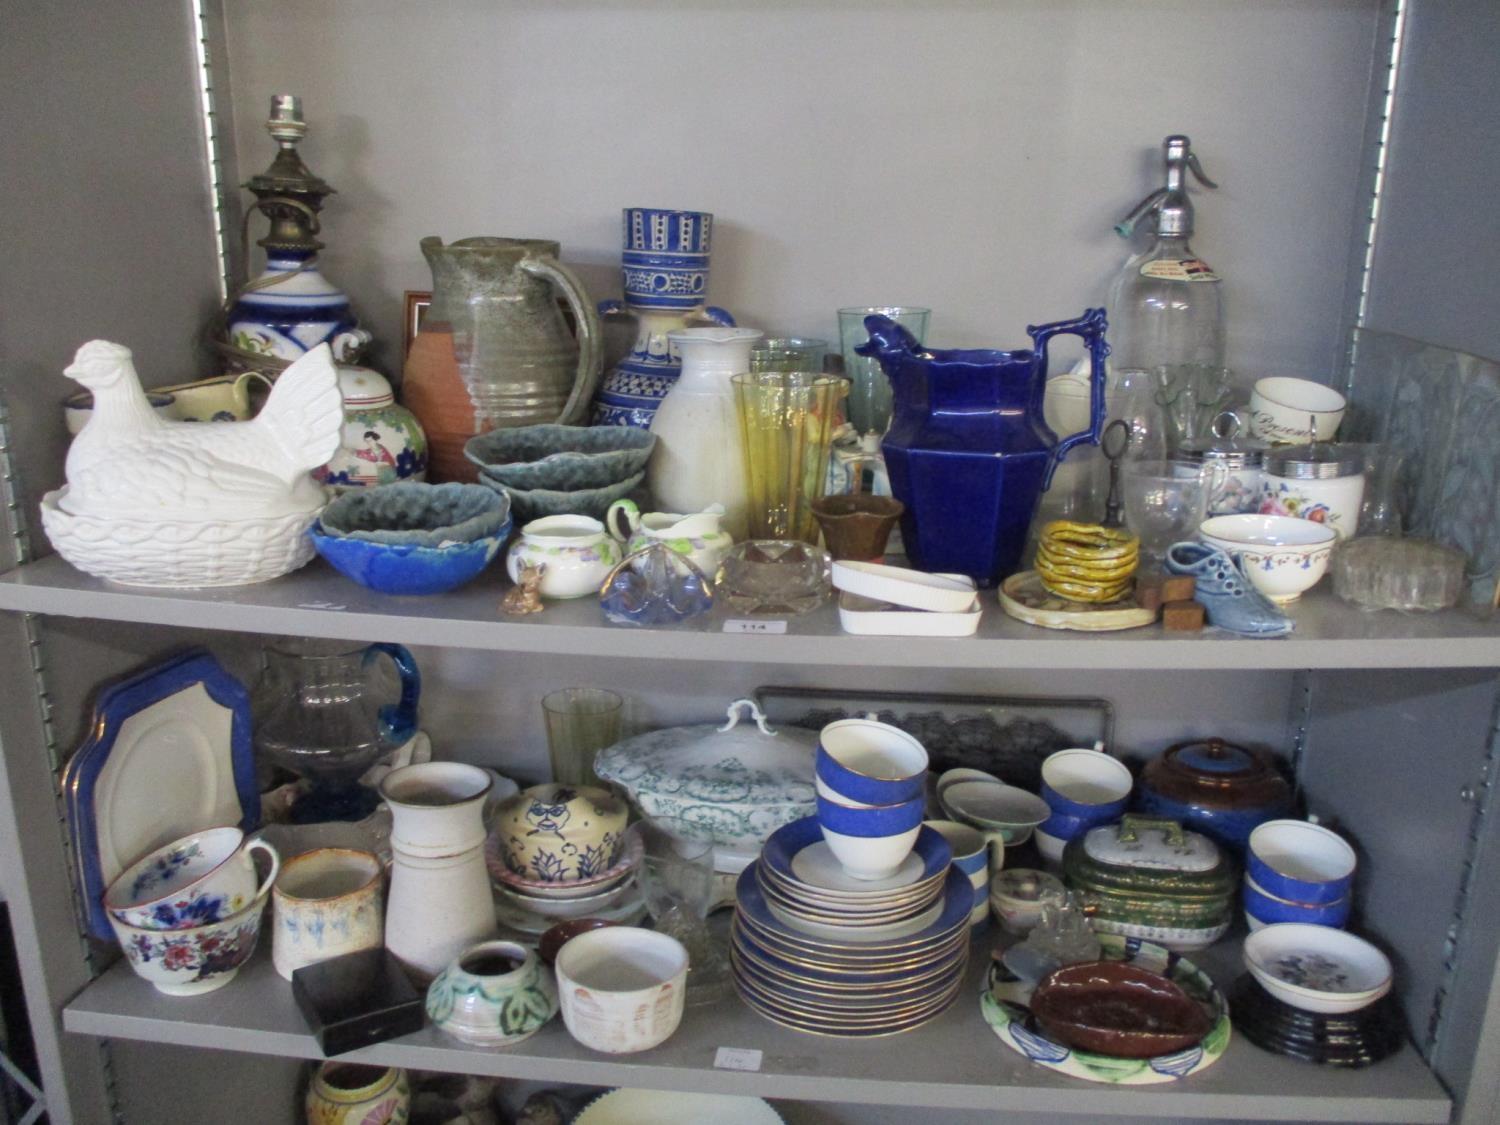 A mixed lot of ceramics and glassware to include Chance Bros dishes, studio pottery and other items